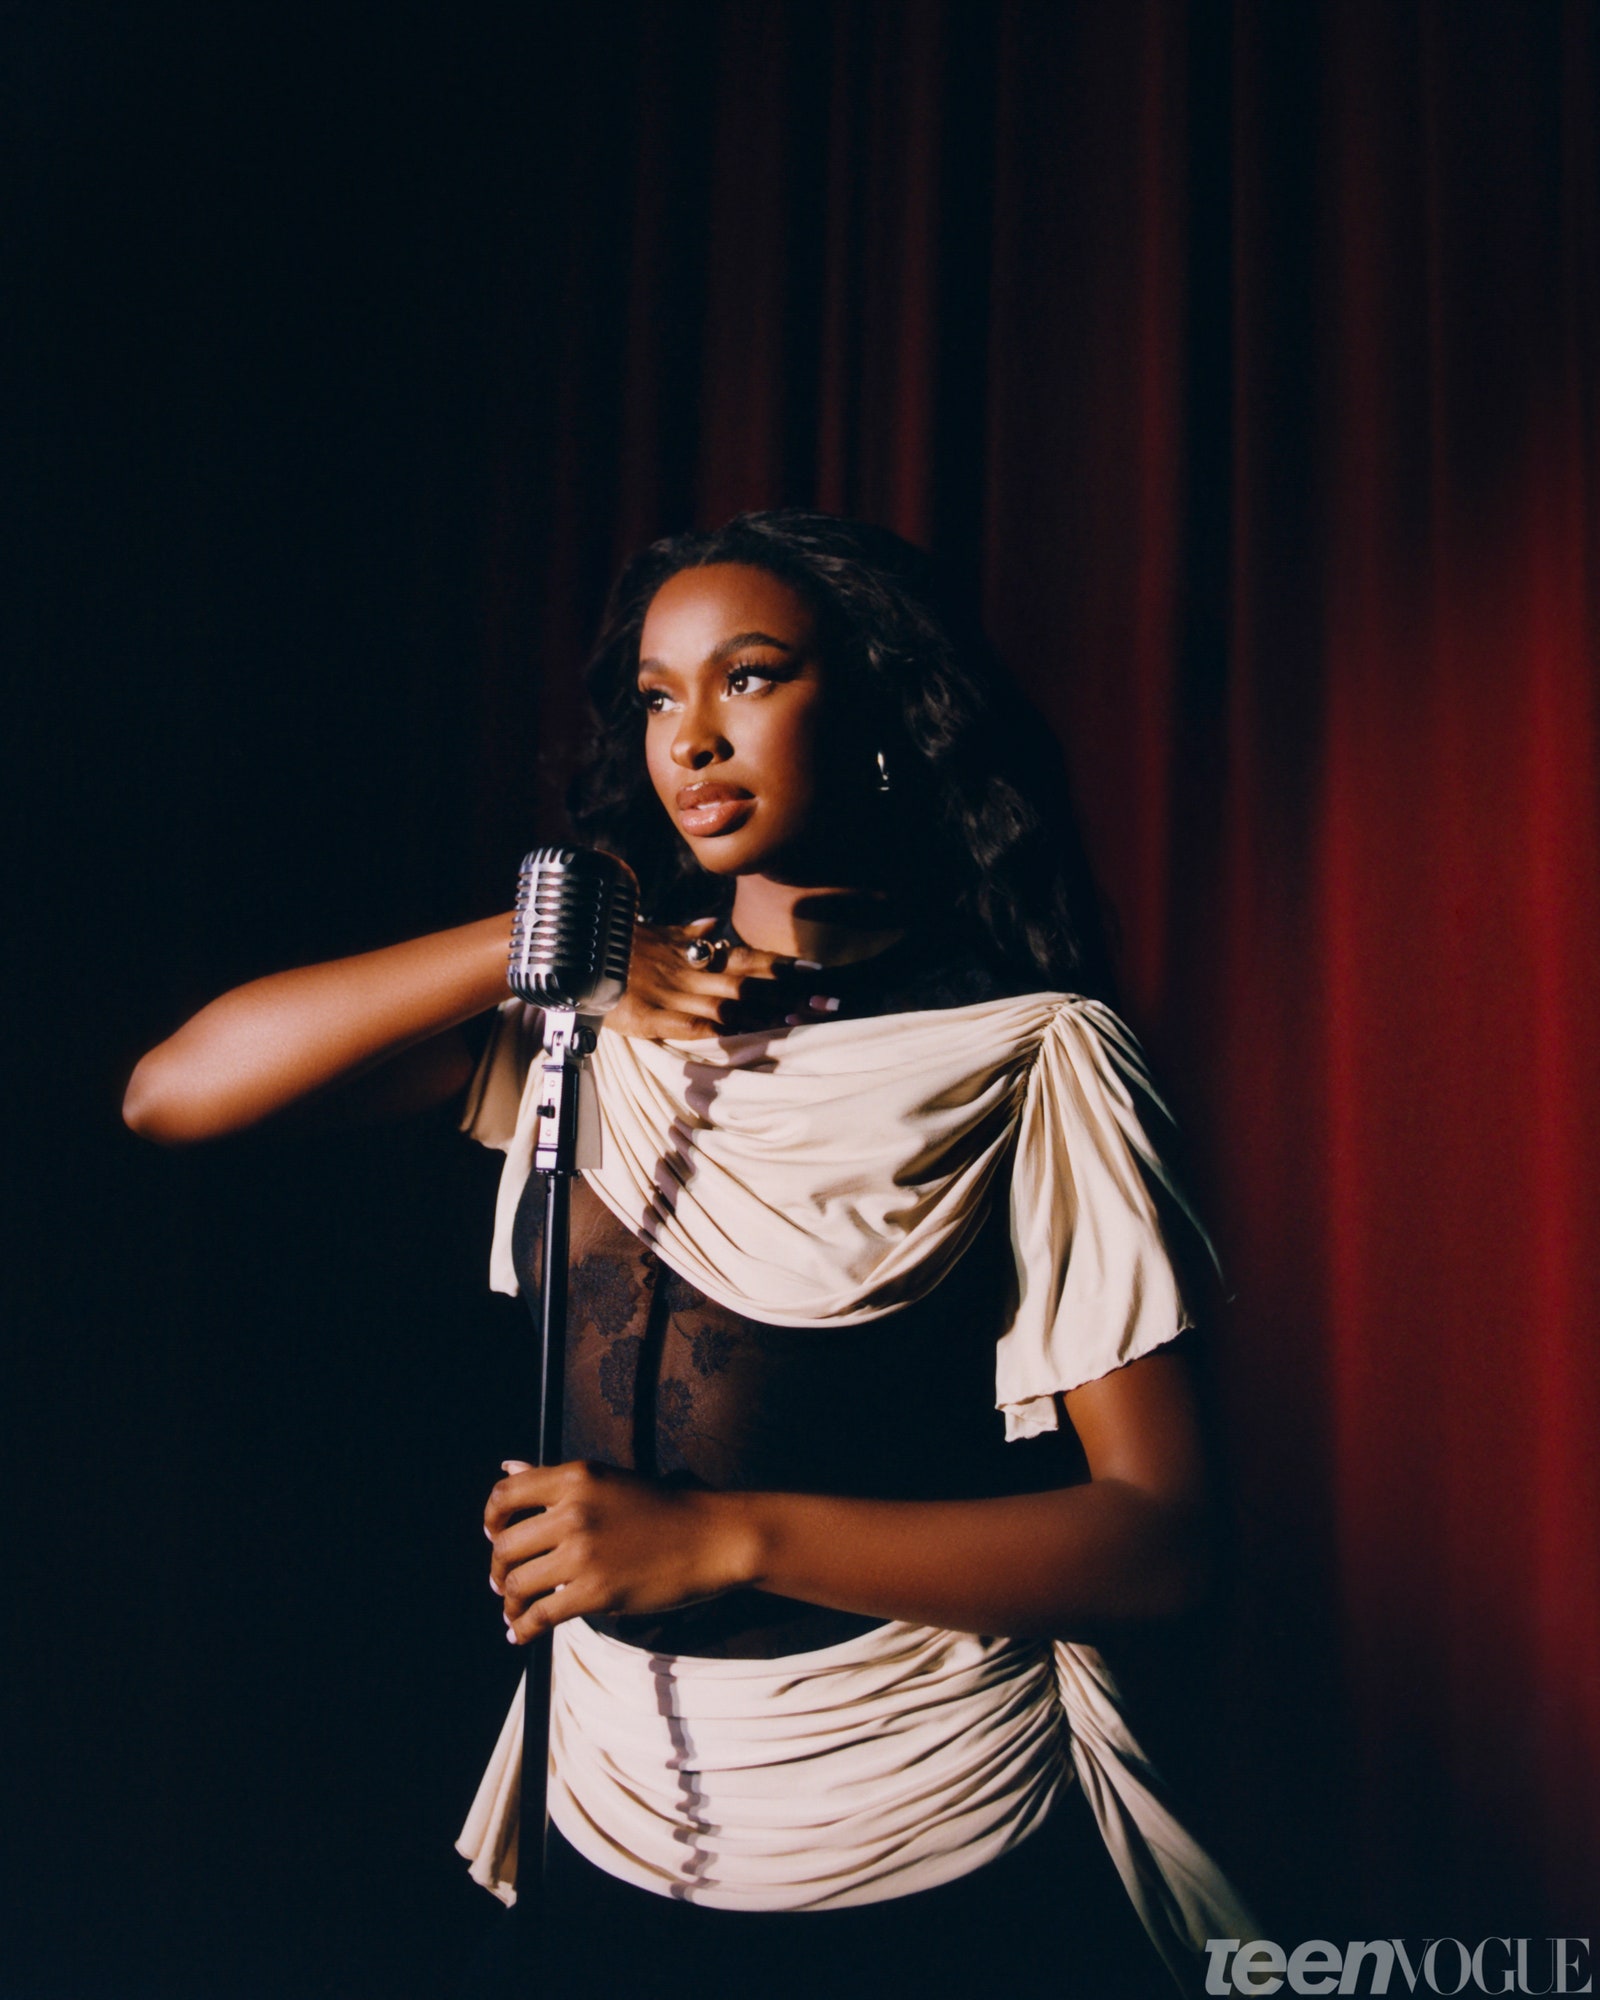 Coco Jones holding a microphone in front of a red theater curtain